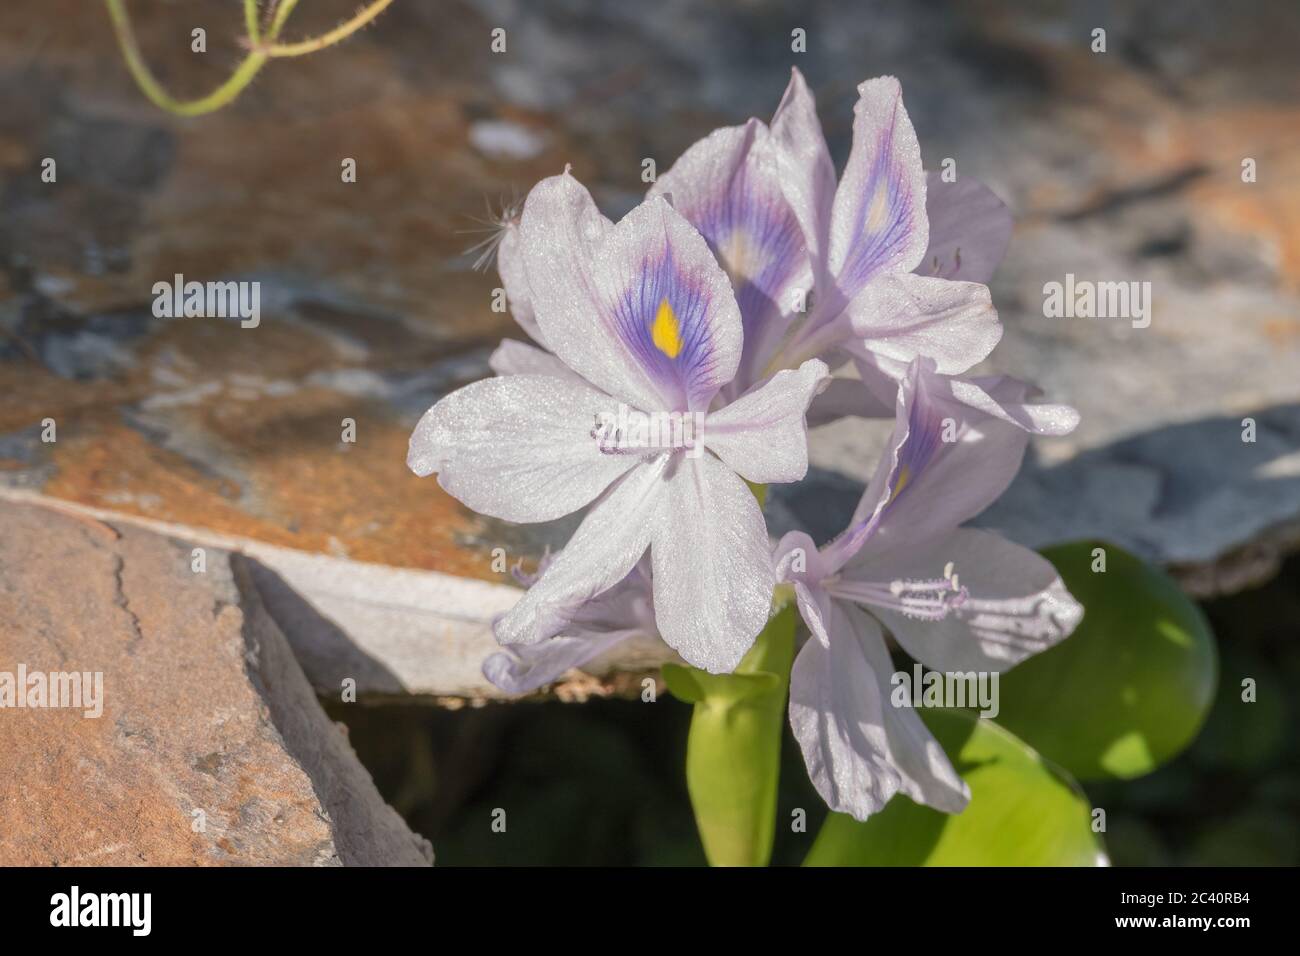 water hyacinth flower in direct sunlight Eichhornia crassipes Stock Photo